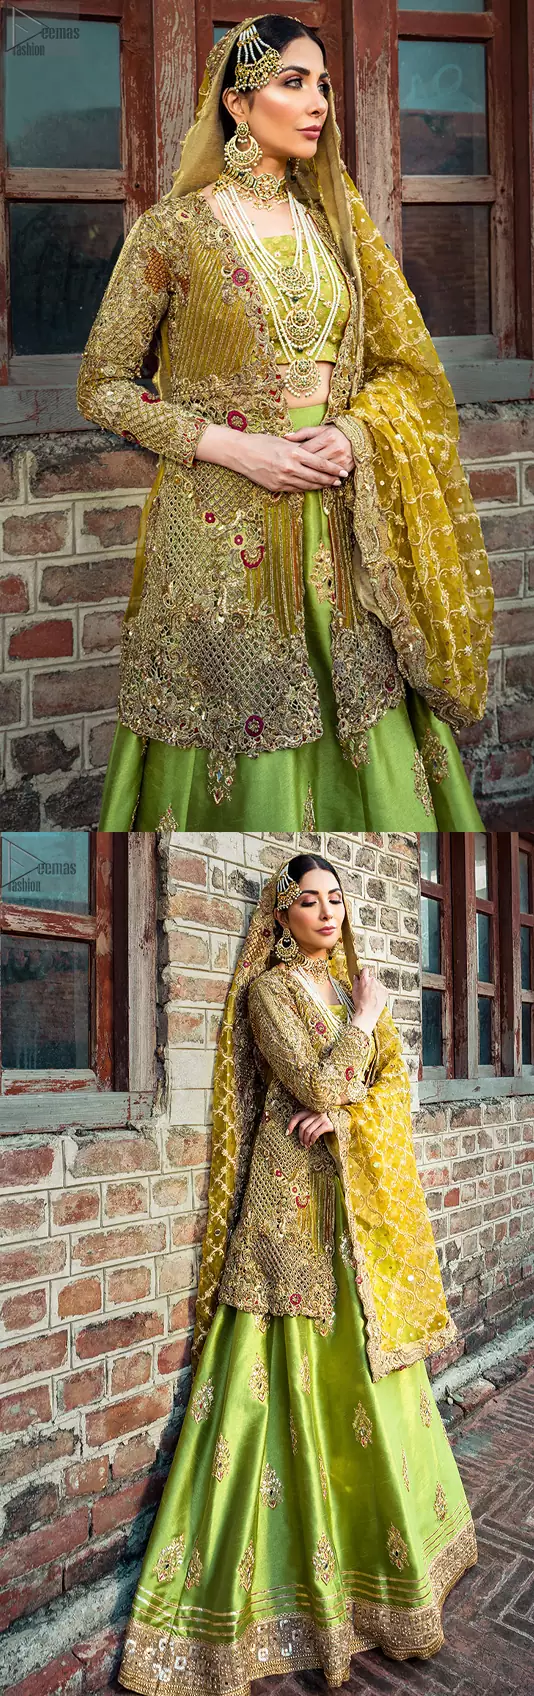 The traditional style of bridal wear always appears the most fascinating. Once worn with confidence, this admirable bridal wear will make you an embodiment of true beauty on your Mehendi Mayon. Bright Green Lehenga Blouse – Front Open Shirt.